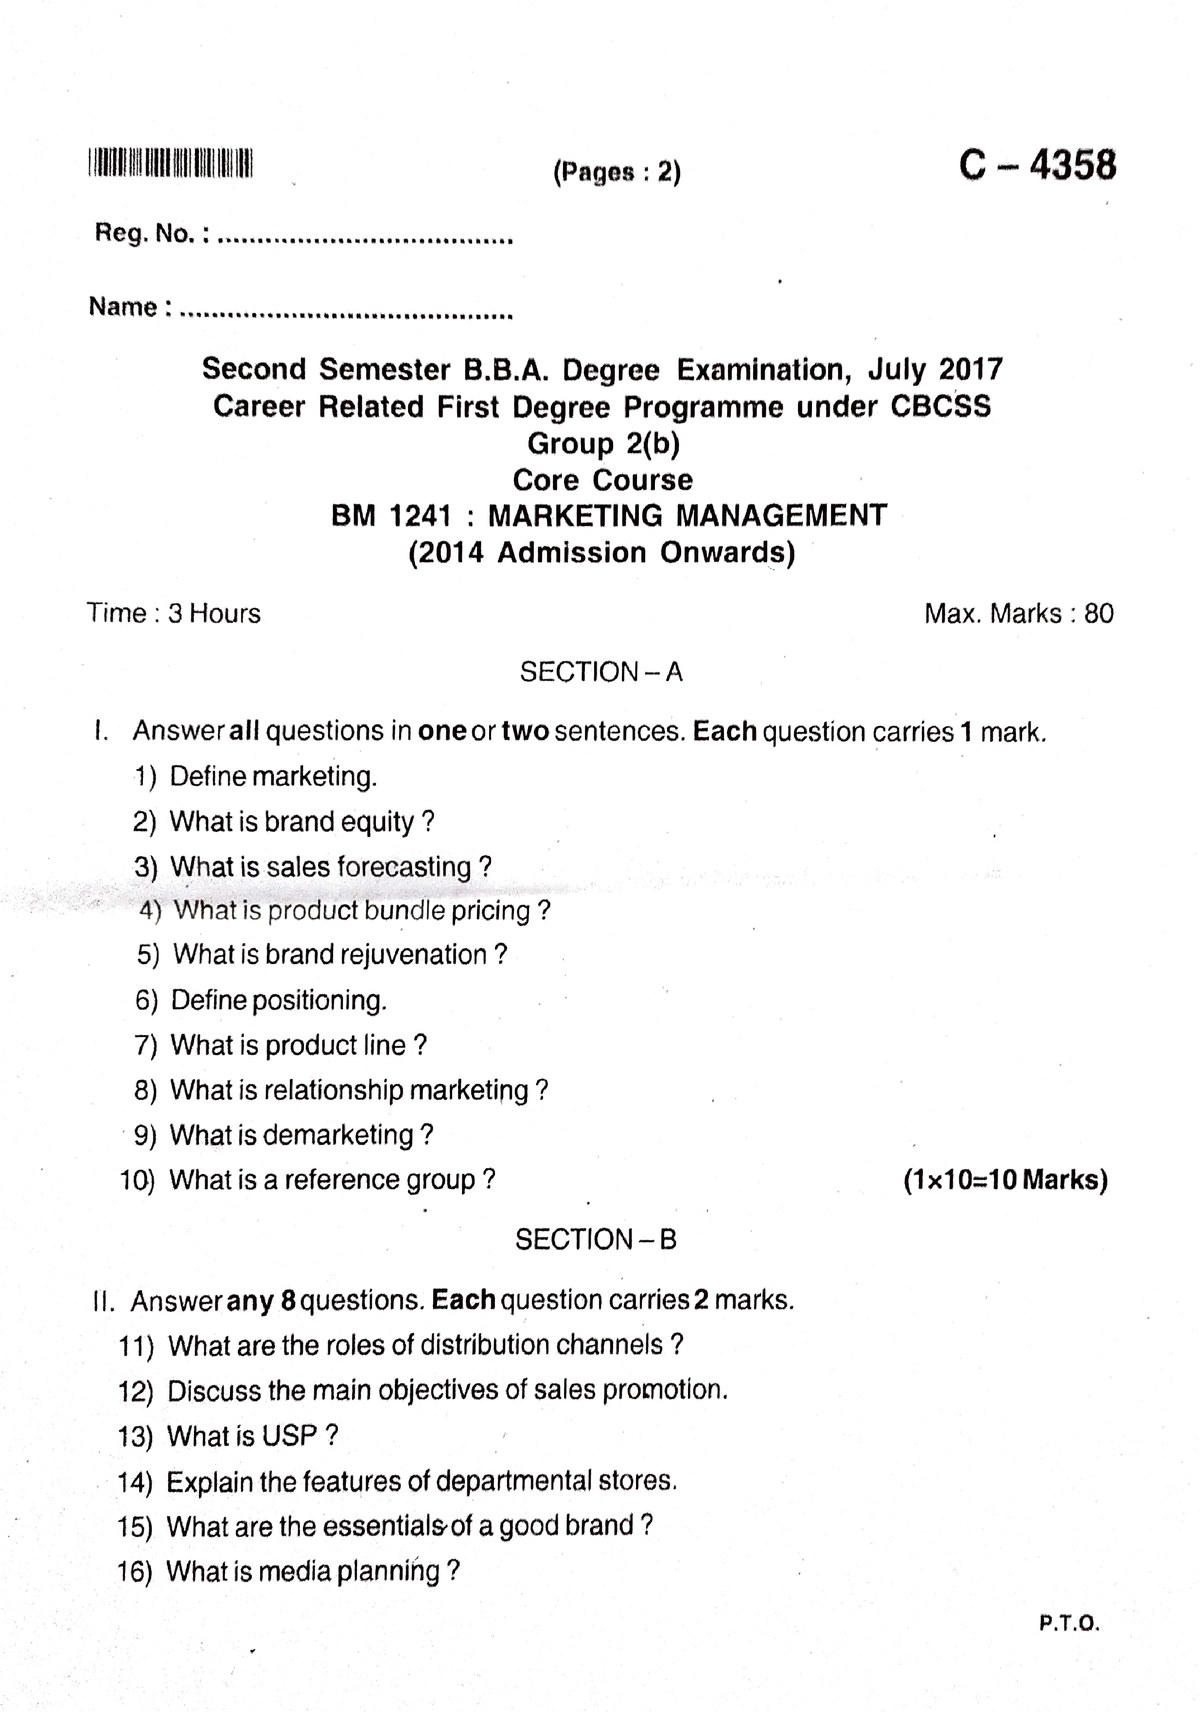 marketing research question paper bba